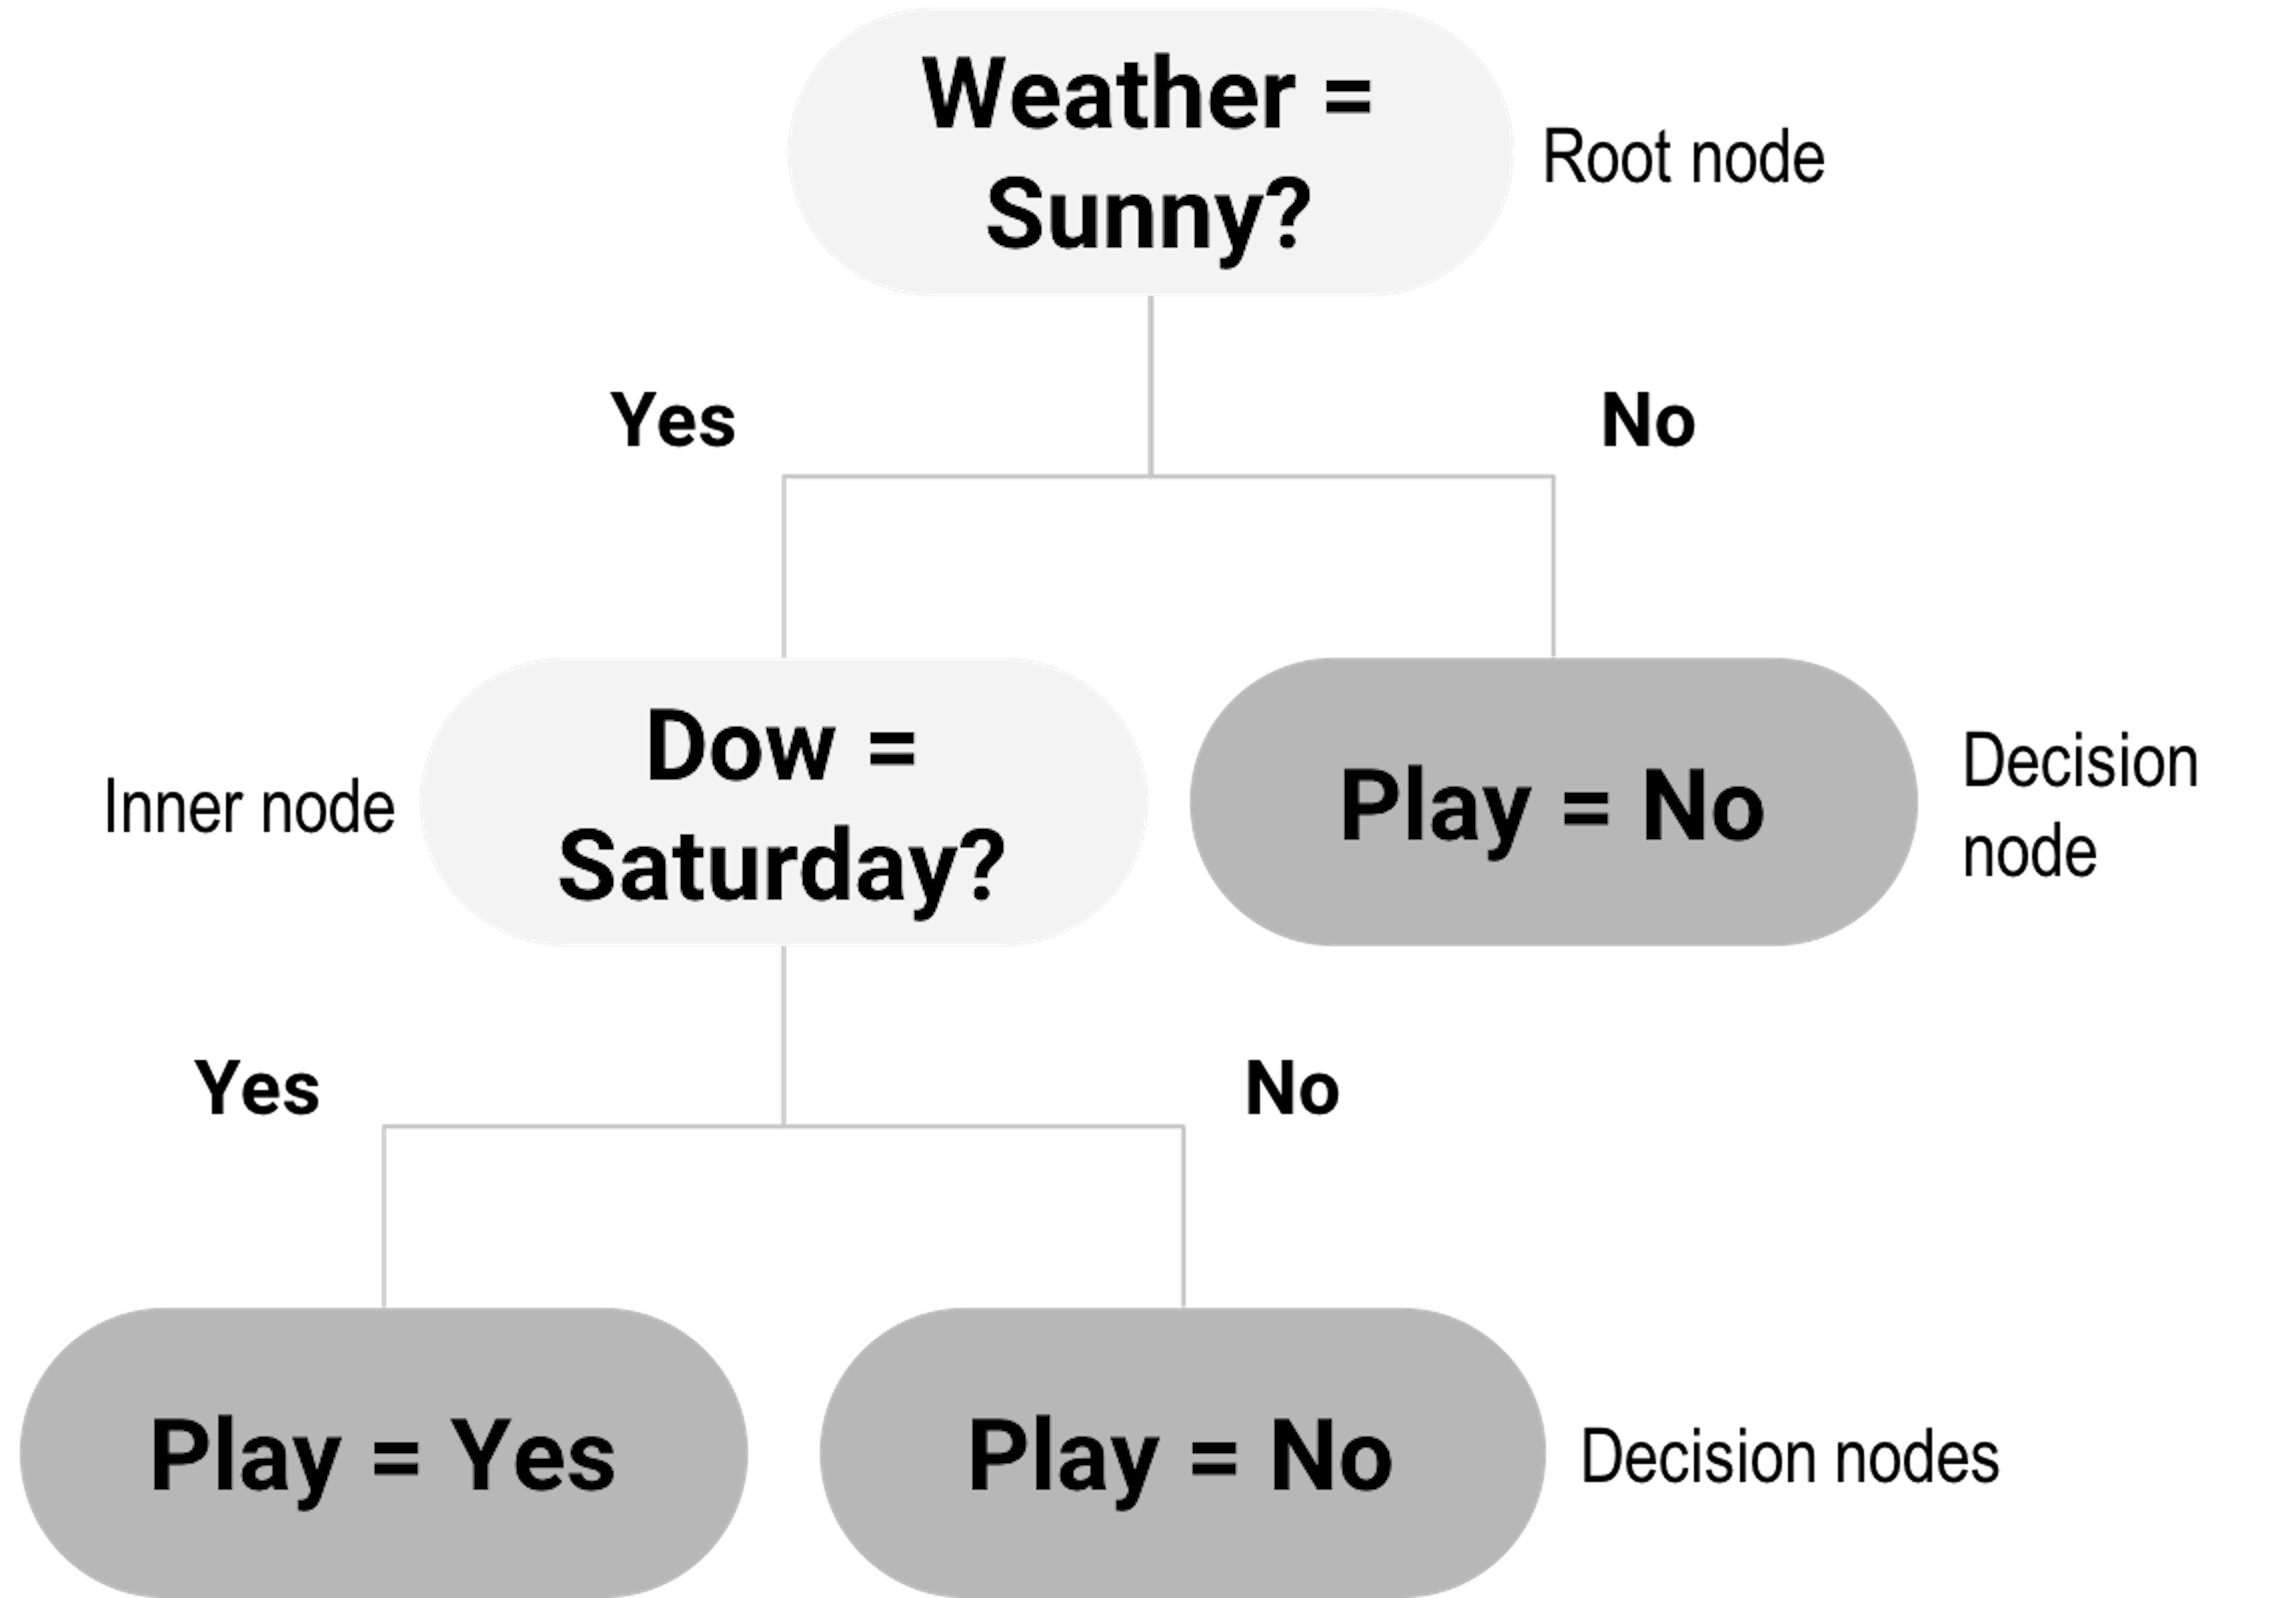 Example of a decision tree model